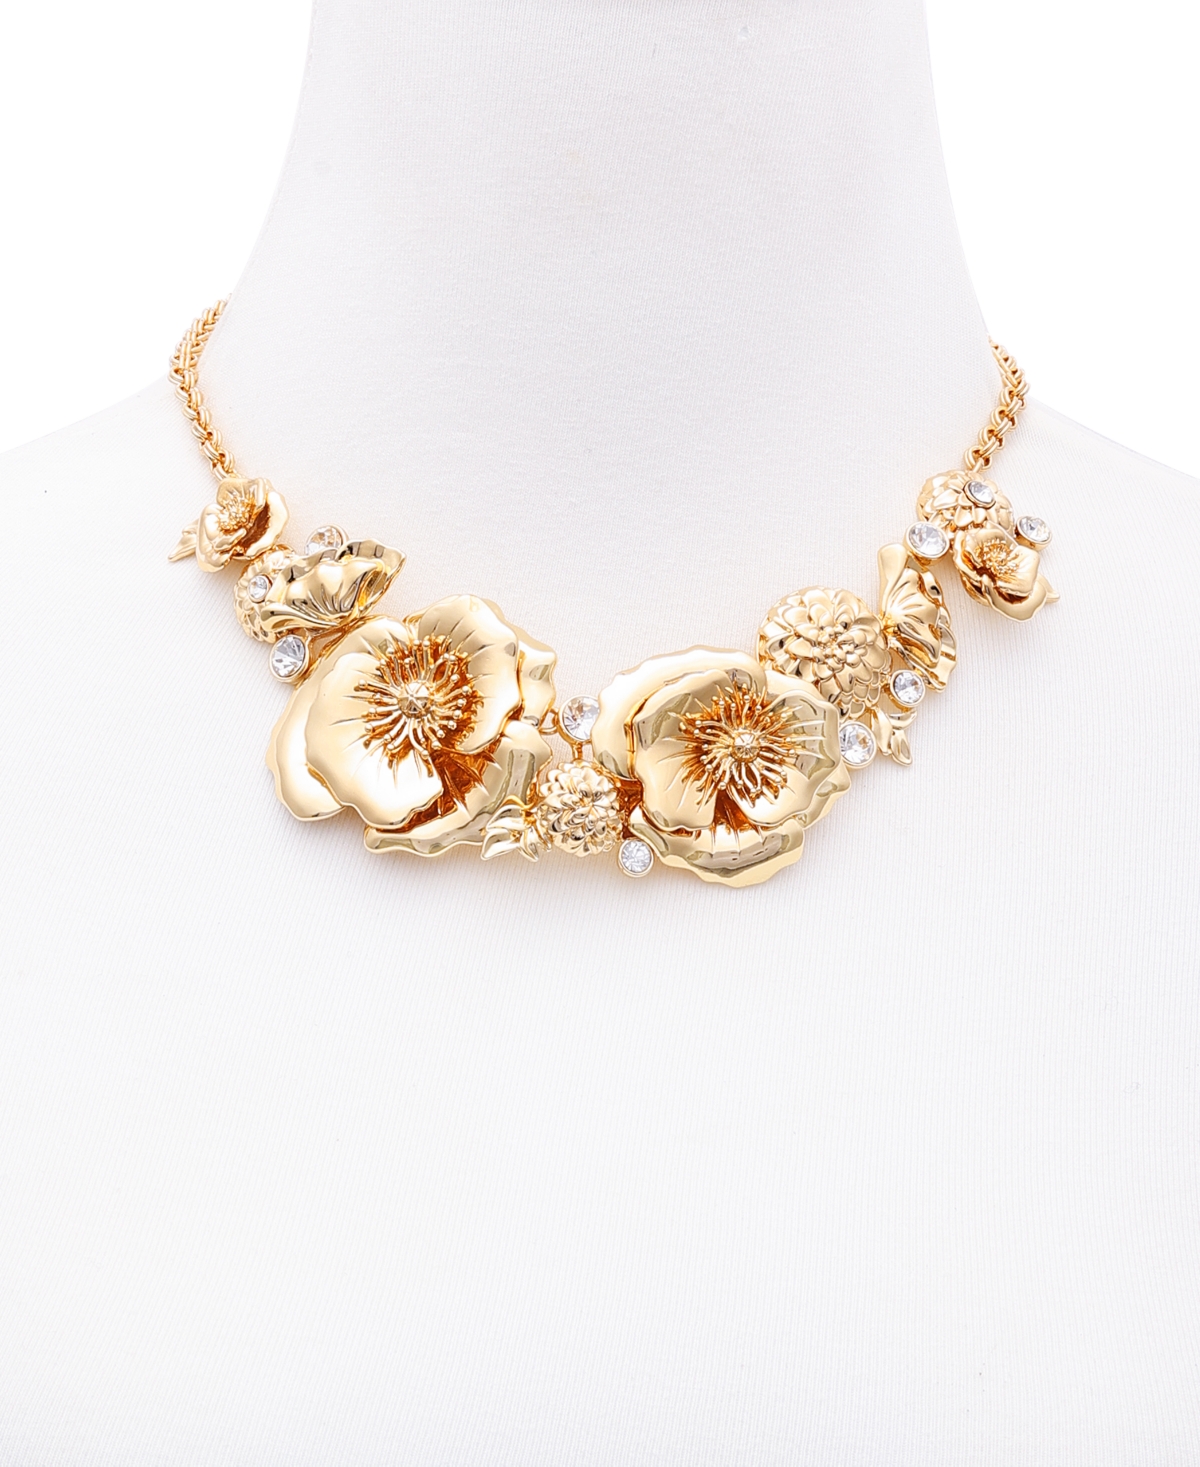 Shop Guess Gold-tone Crystal & Flower Statement Necklace, 16" + 2" Extender